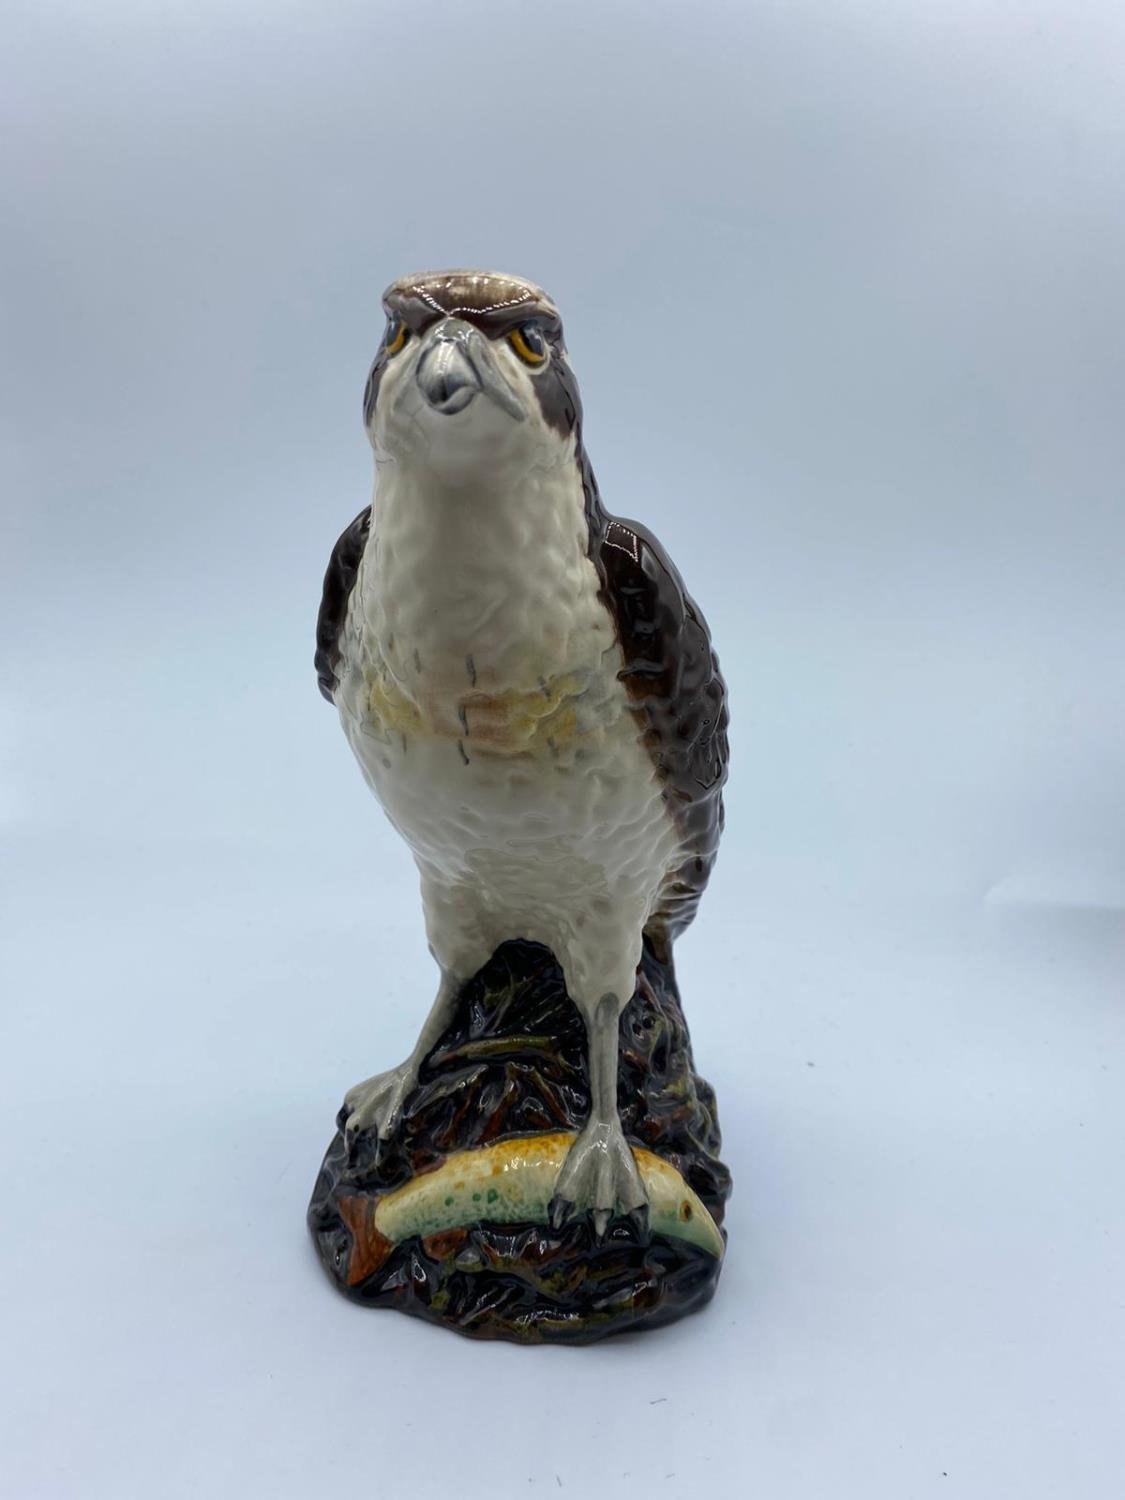 Royal Doulton Whisky decanter. Osprey modelled in 1977 by D. Lyttleton for Whyte and Mackay Scotch